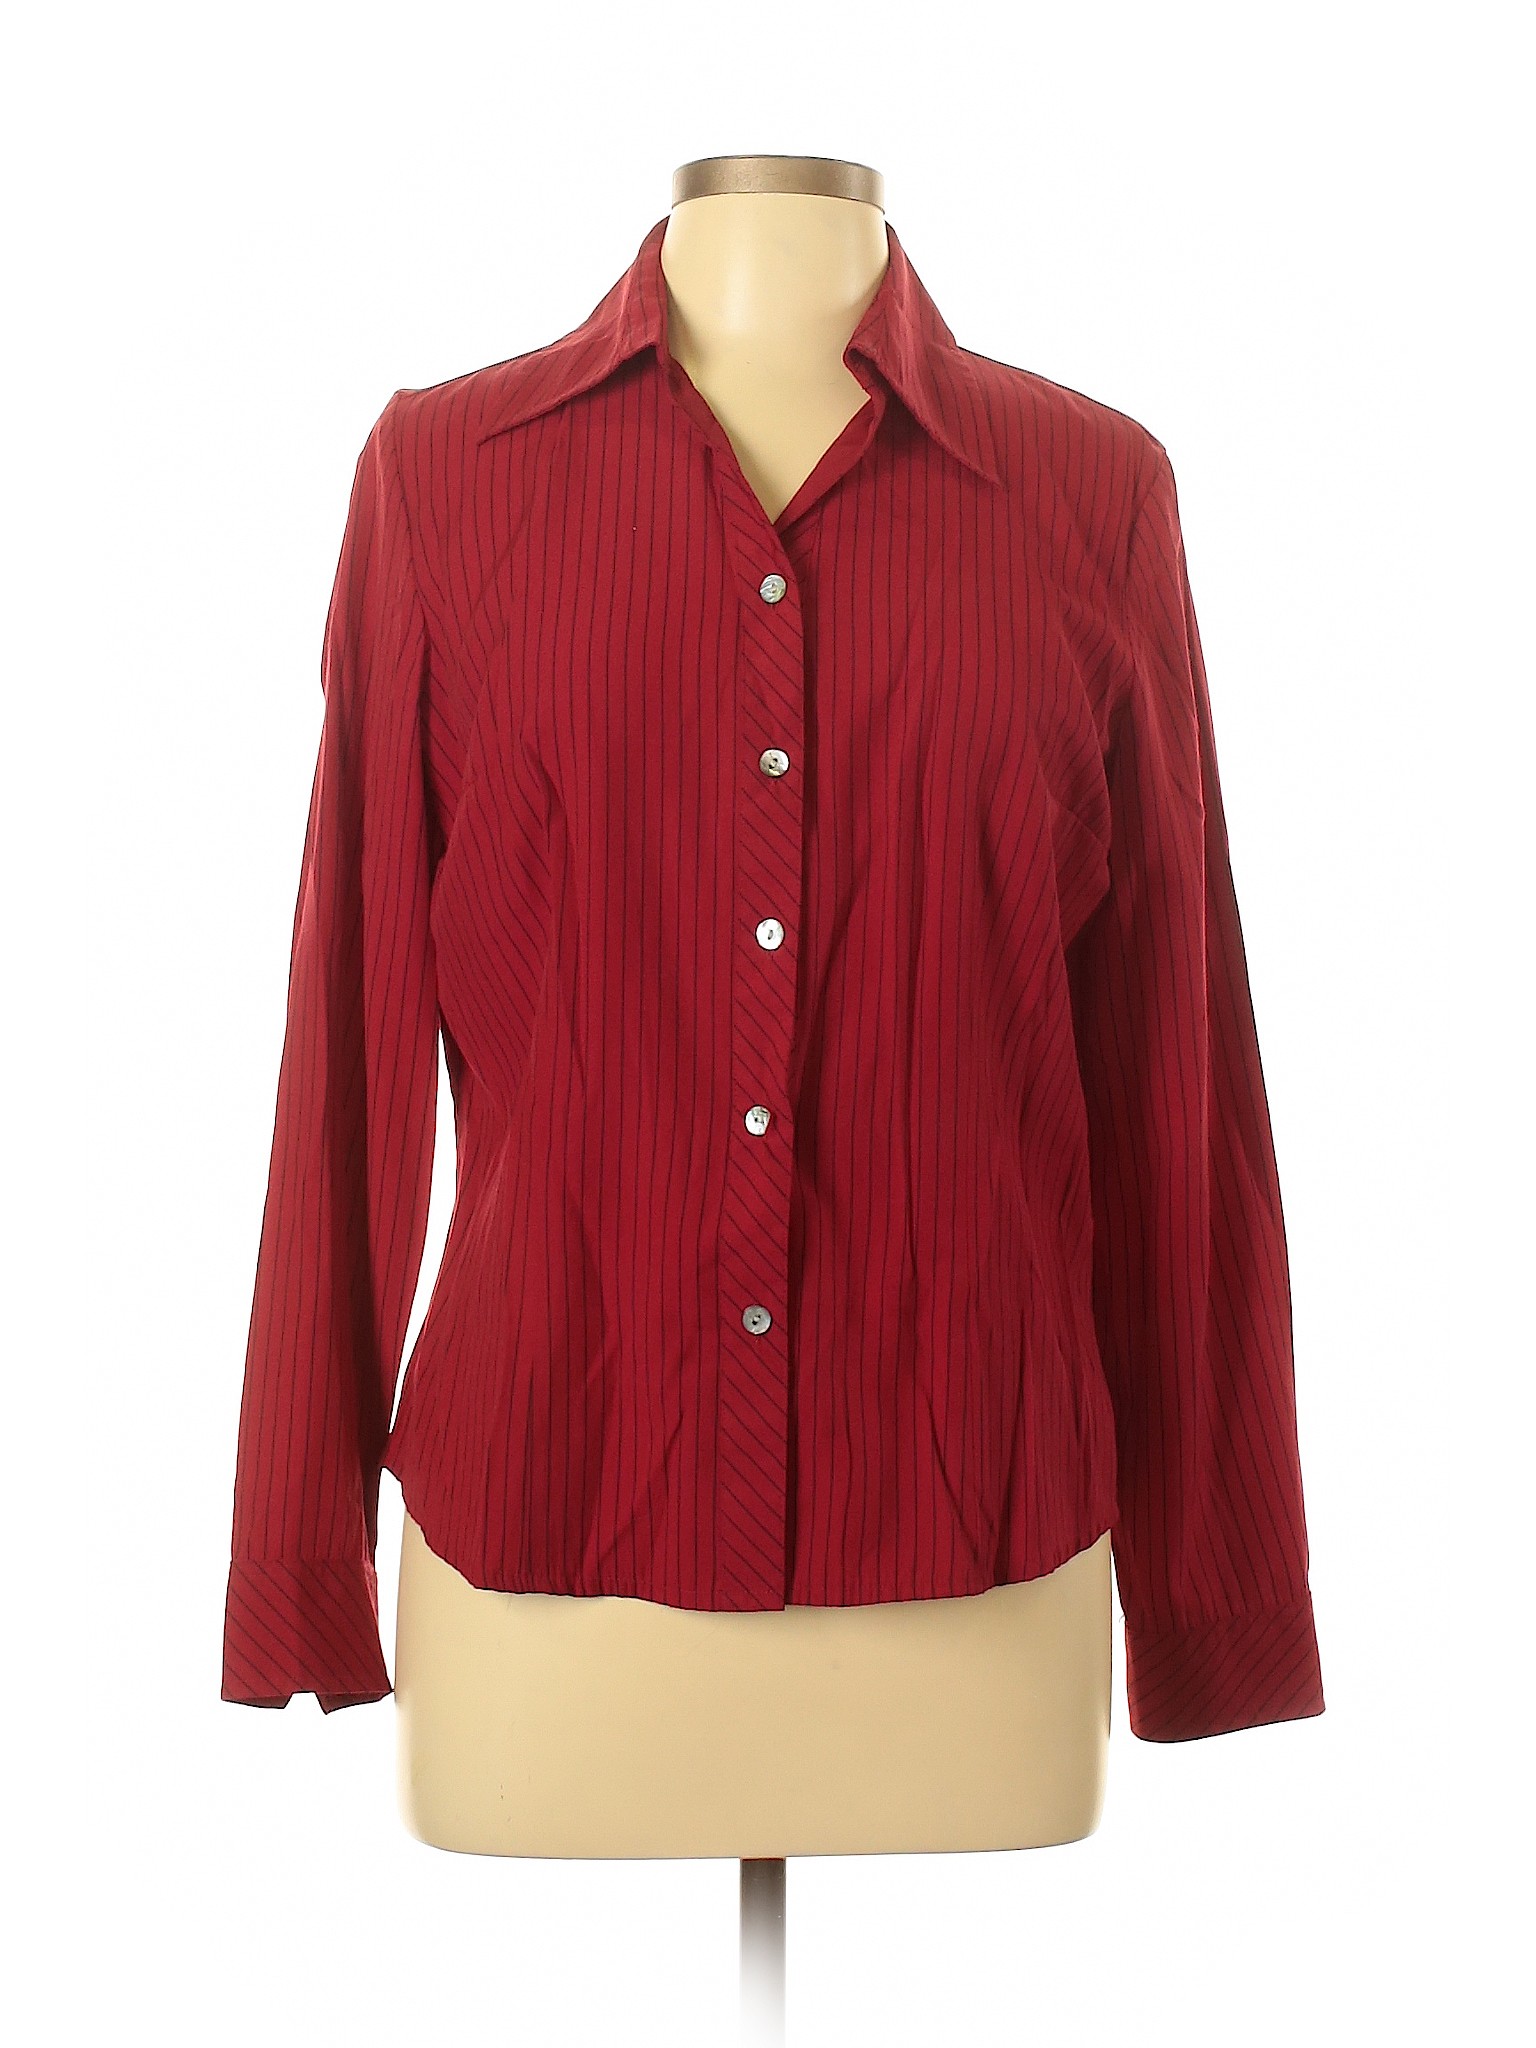 long sleeve red button up shirt